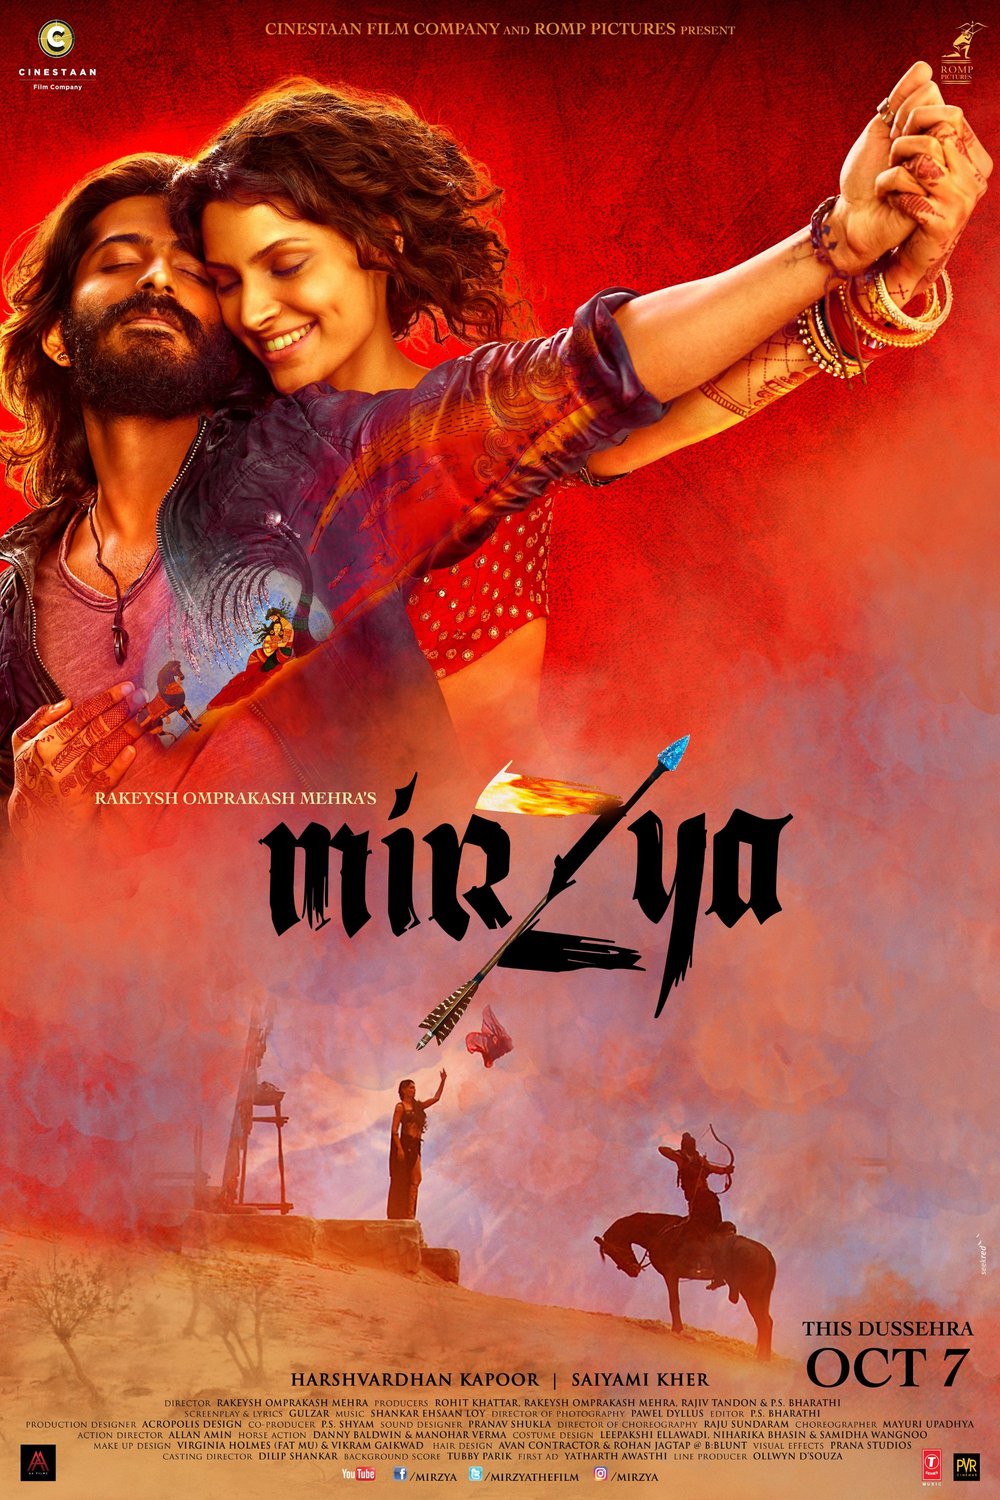 Poster of the movie Mirzya